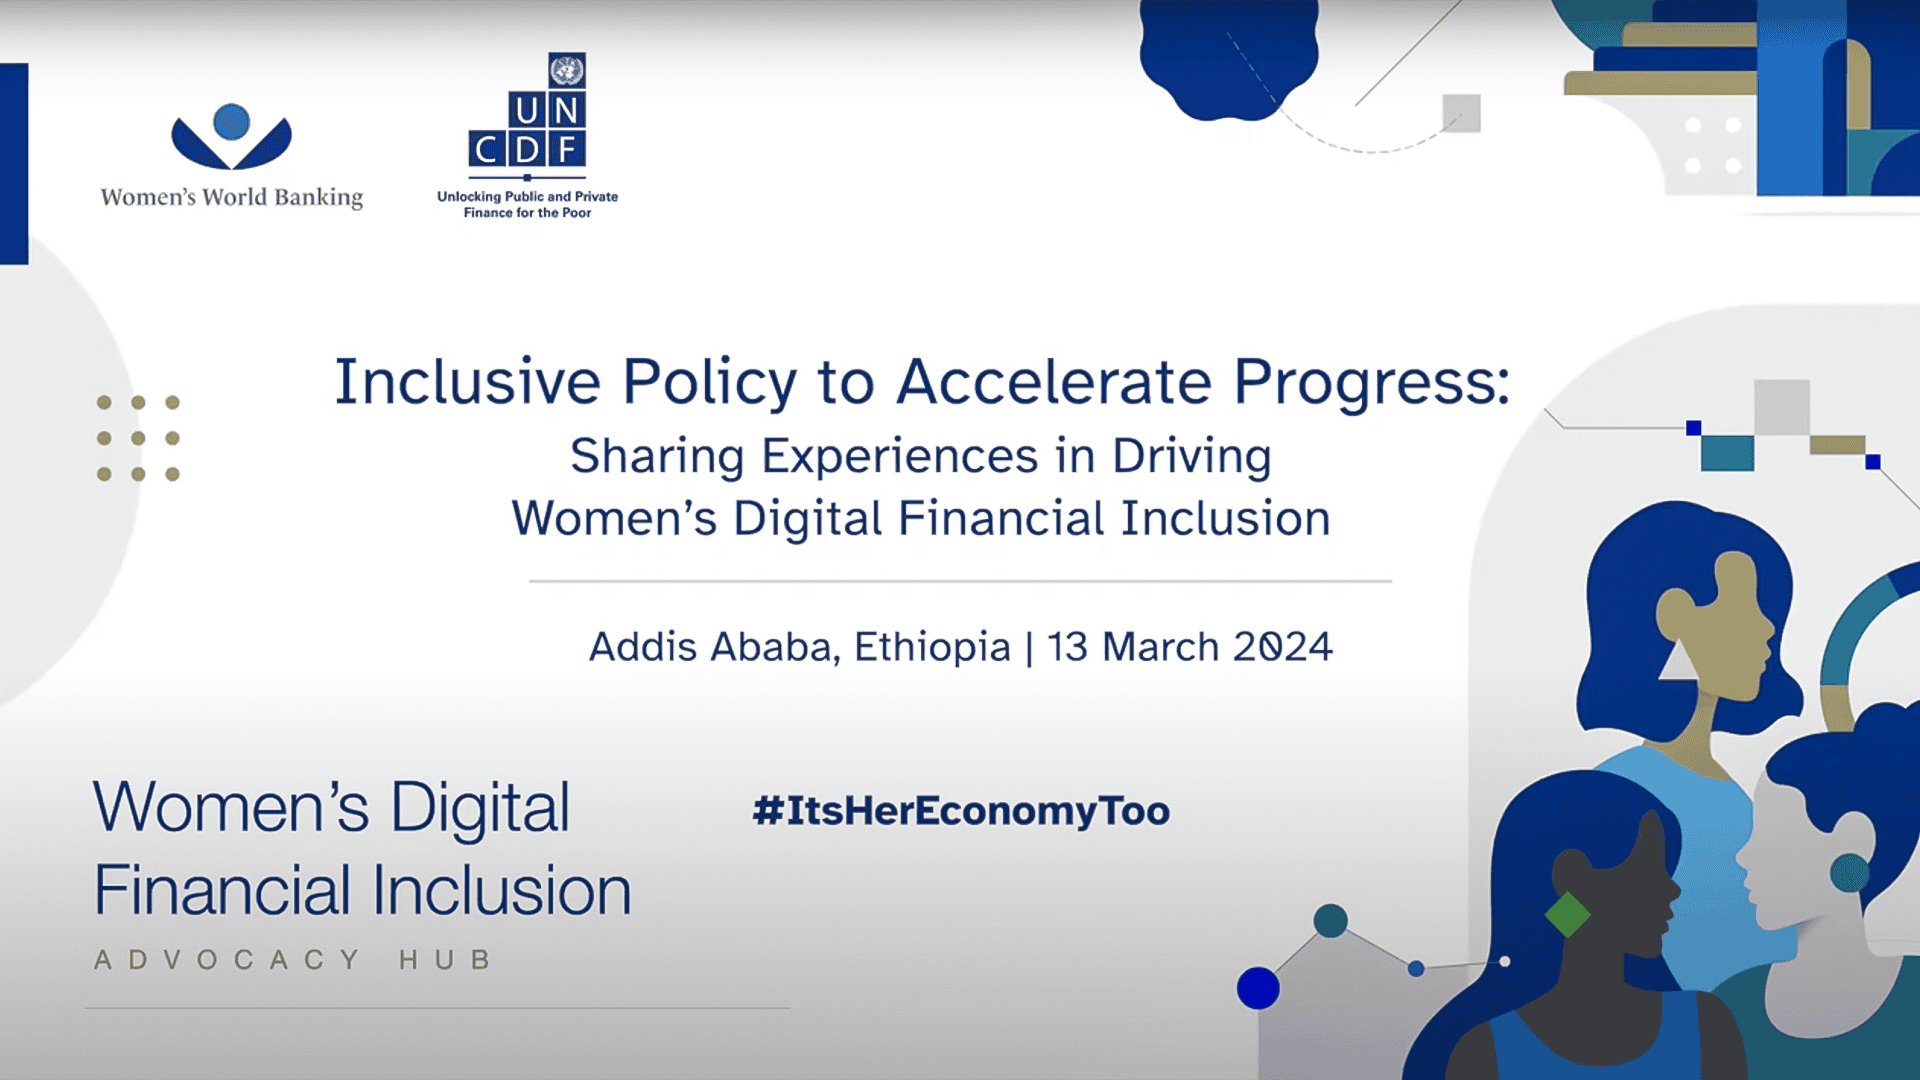 Inclusive Policy to AccelerateProgress Womens Digital Financial Inclusion Advocacy Hub Panel